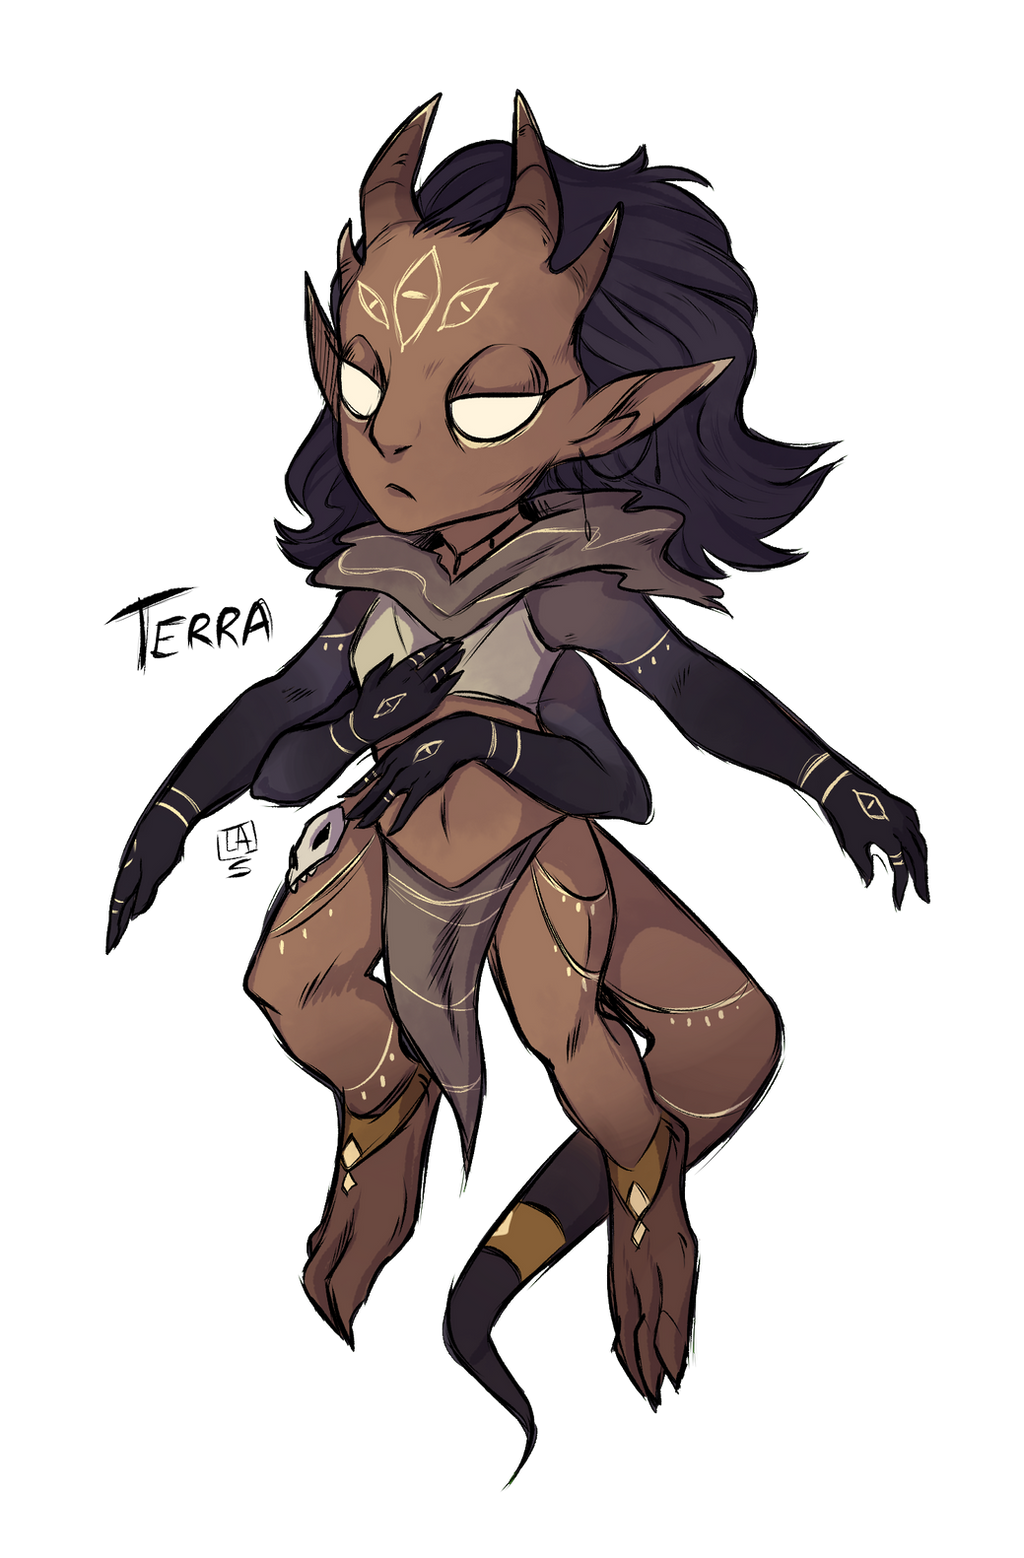 terra___fr_commission_by_picheww-db2j00a.png